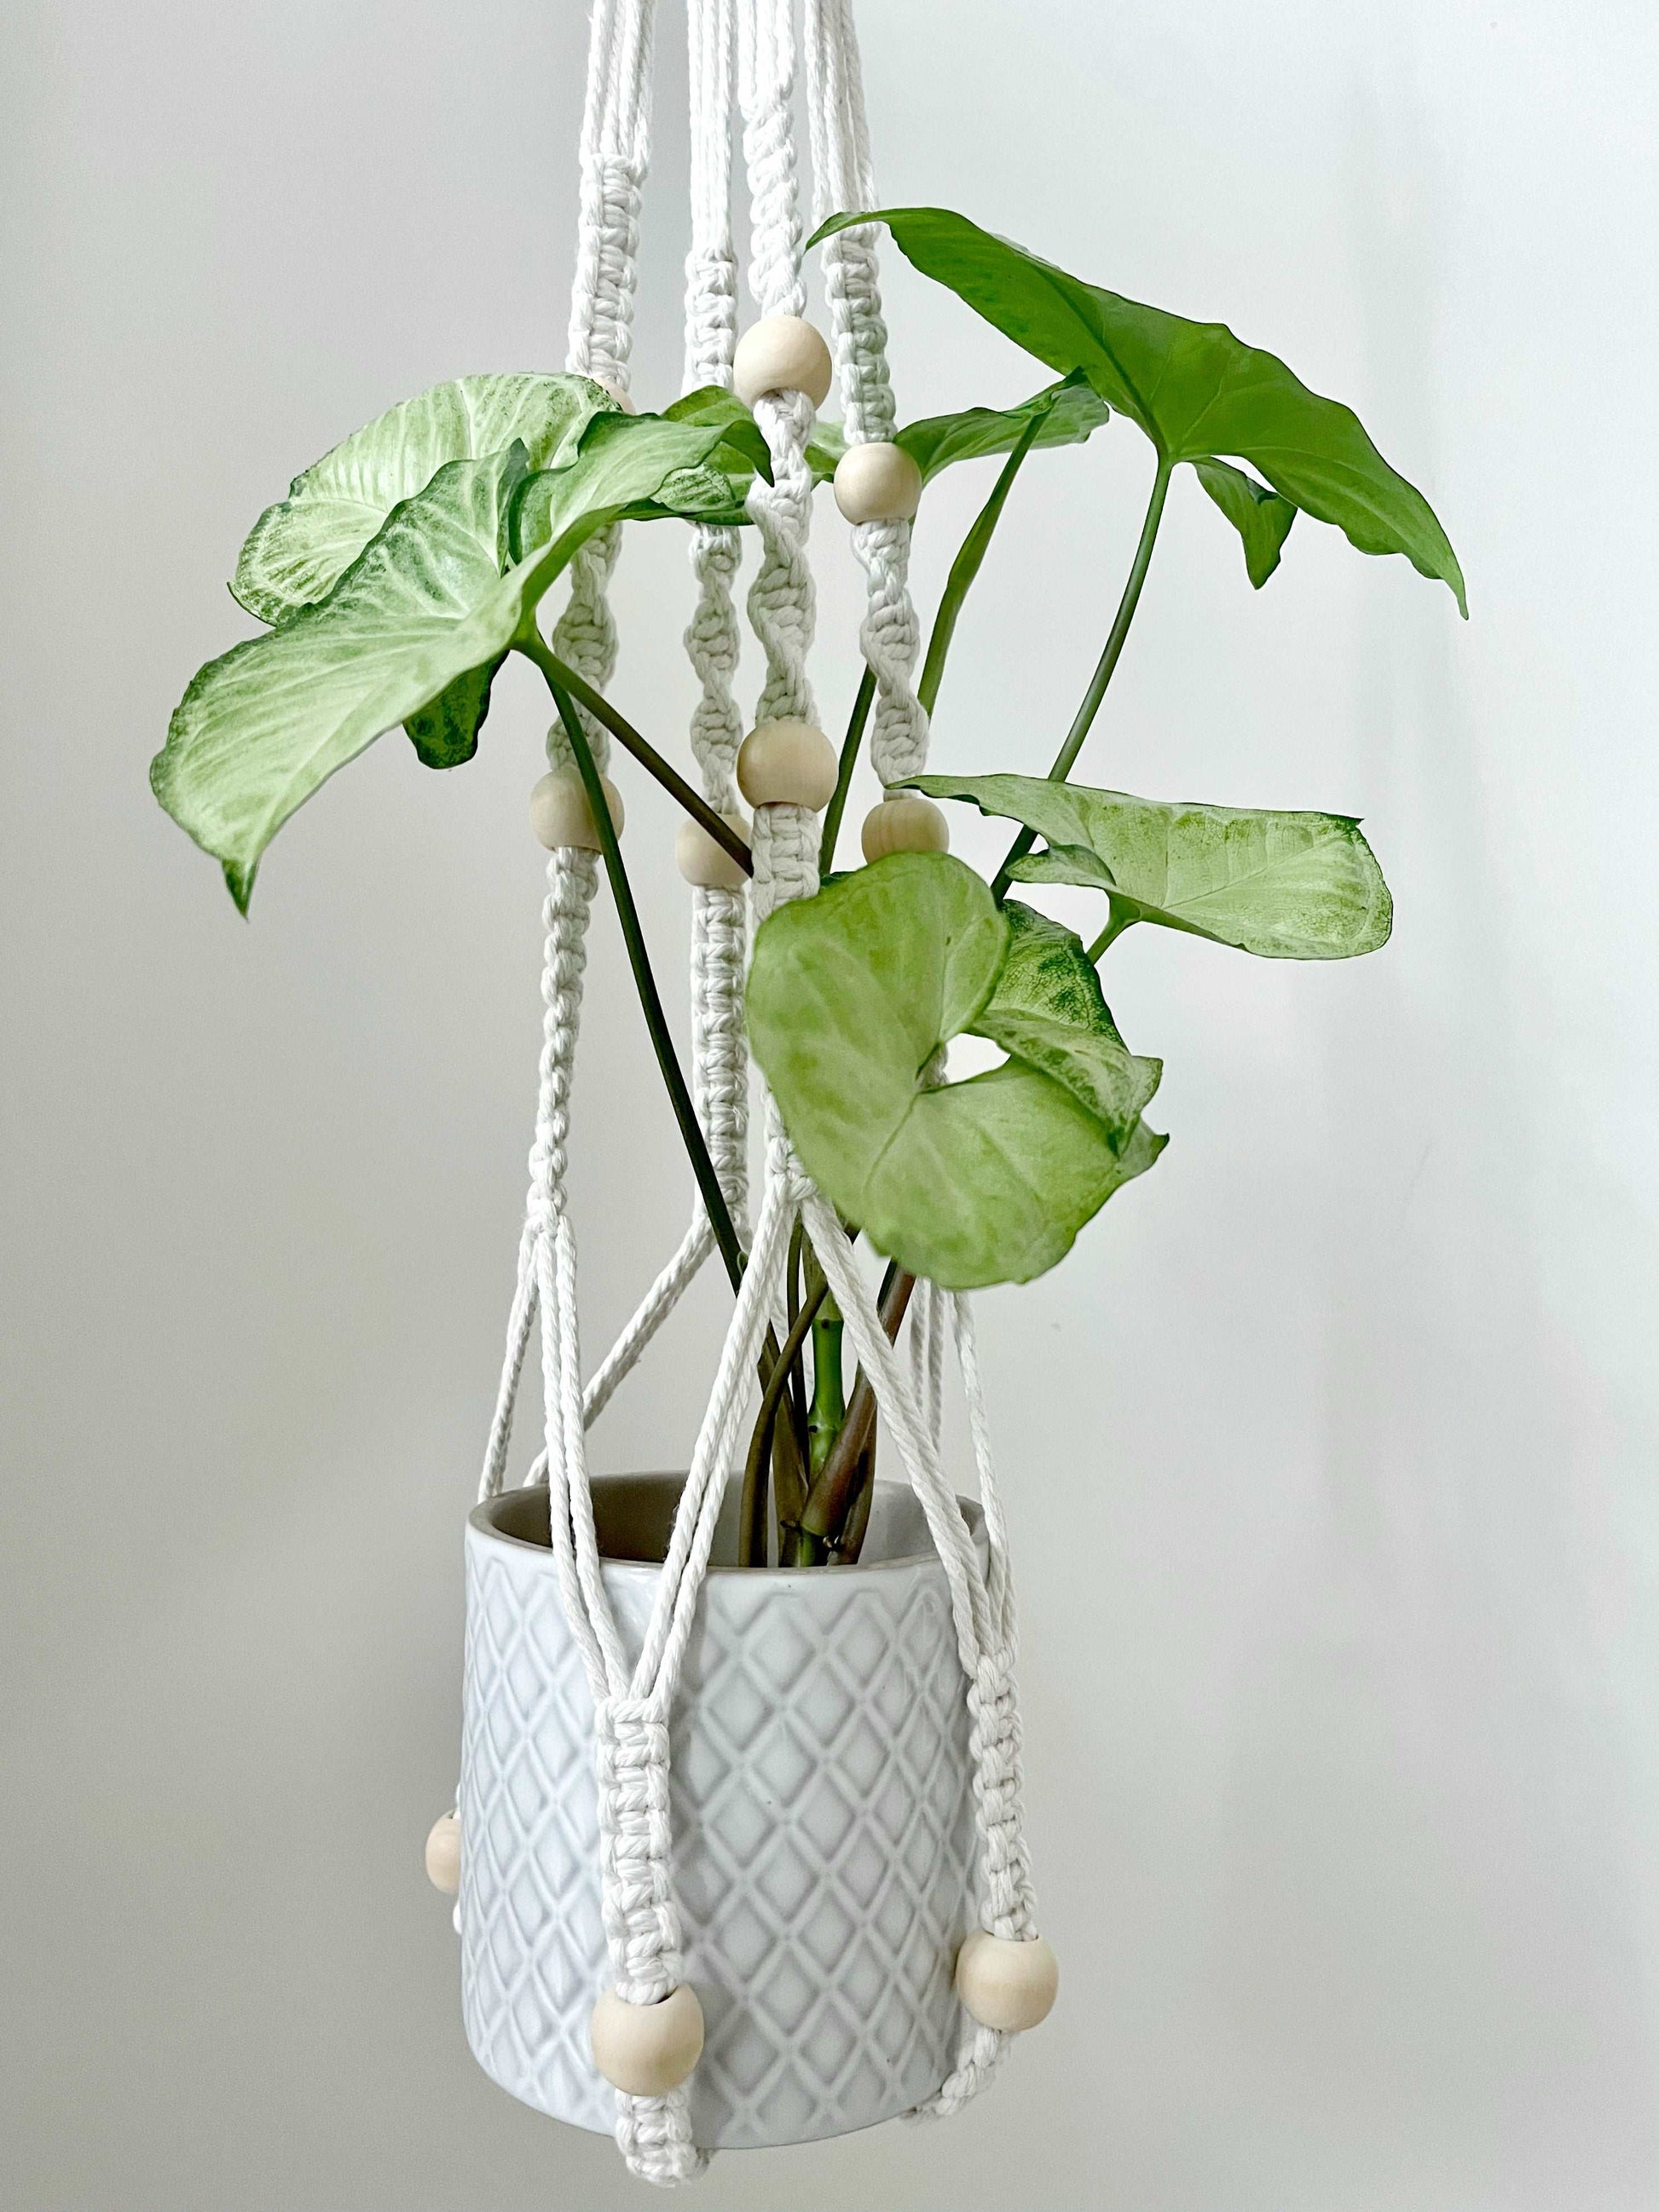 Macrame Plant Hanger with Beads